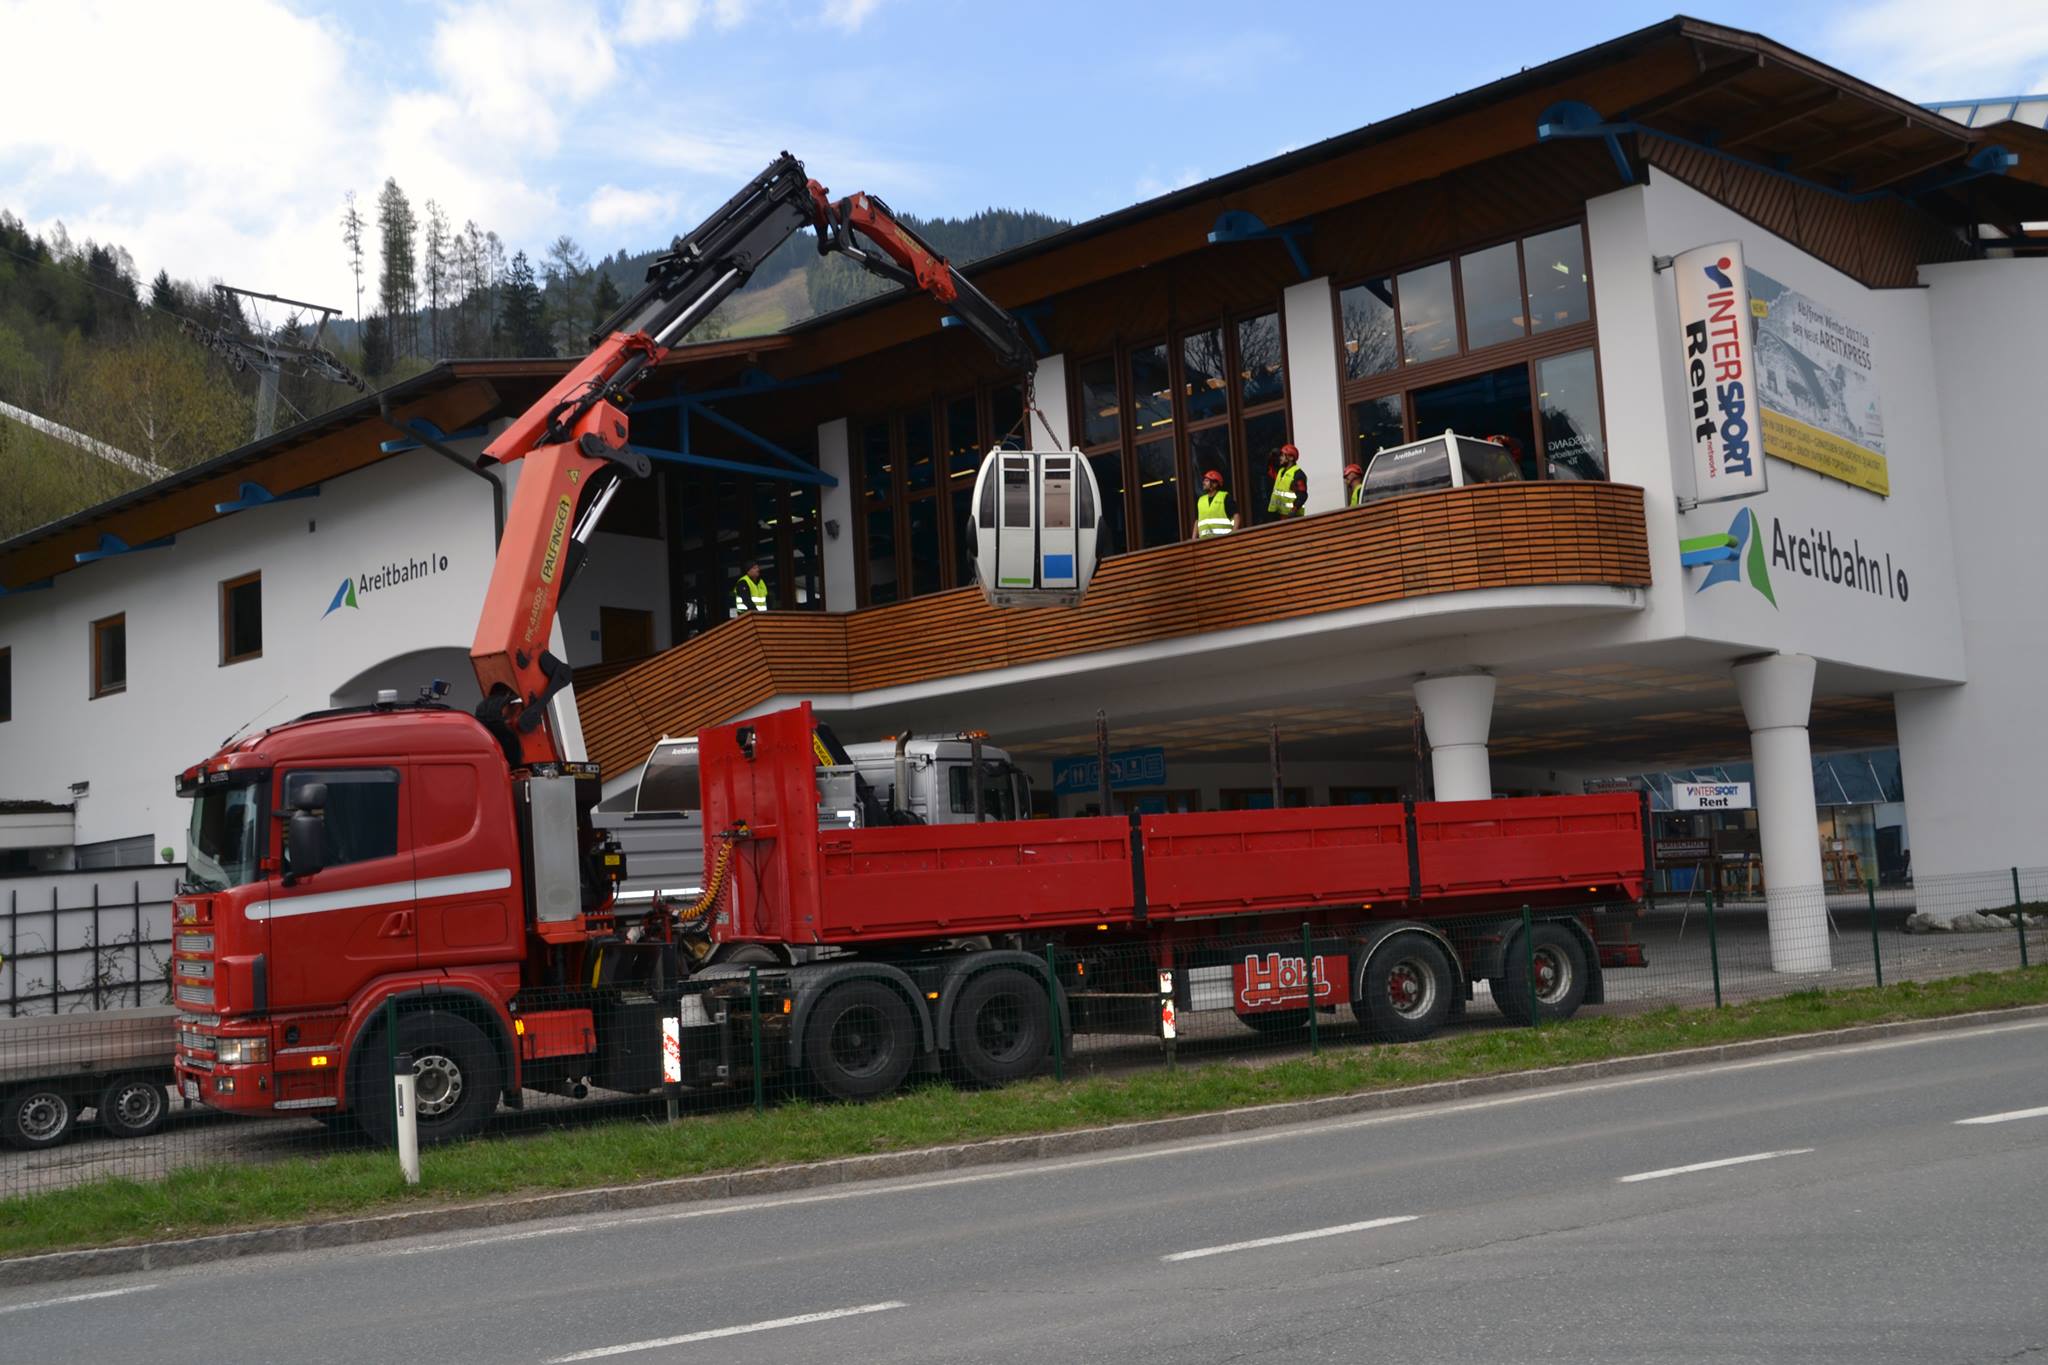 Work Starts On New Zell am See Gondola – Old Lift Going to Colombian Theme Park